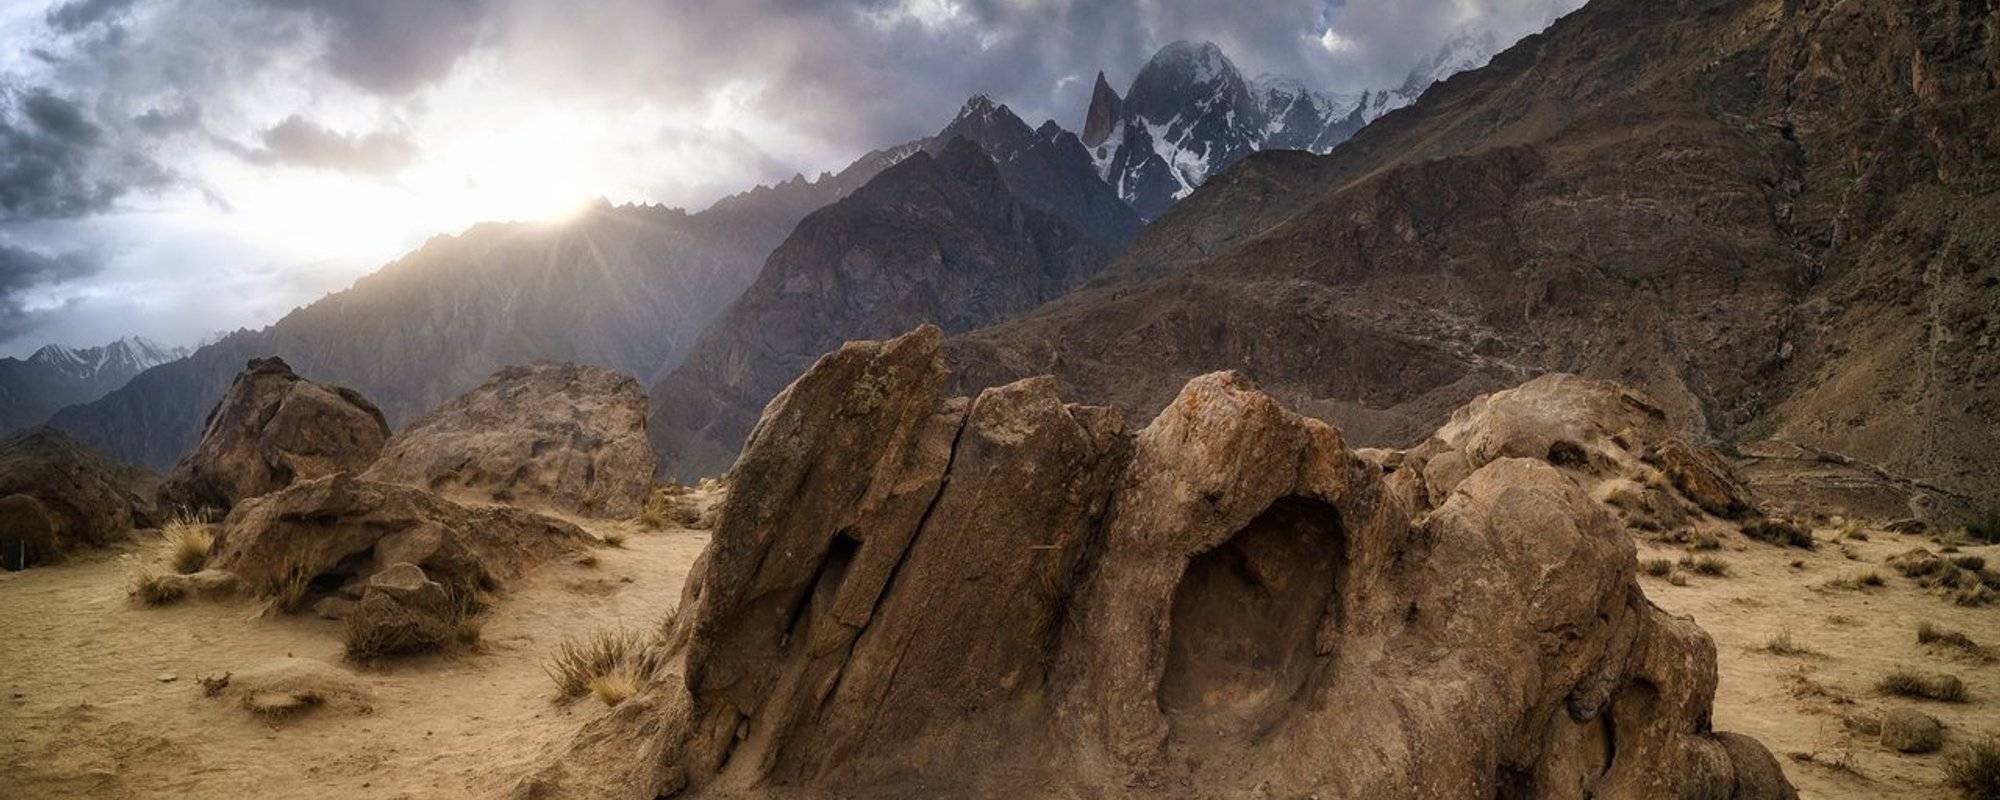 📷 The Land of High Mountains: Pakistan. Day 7. How to Get to the Eagle's Nest?